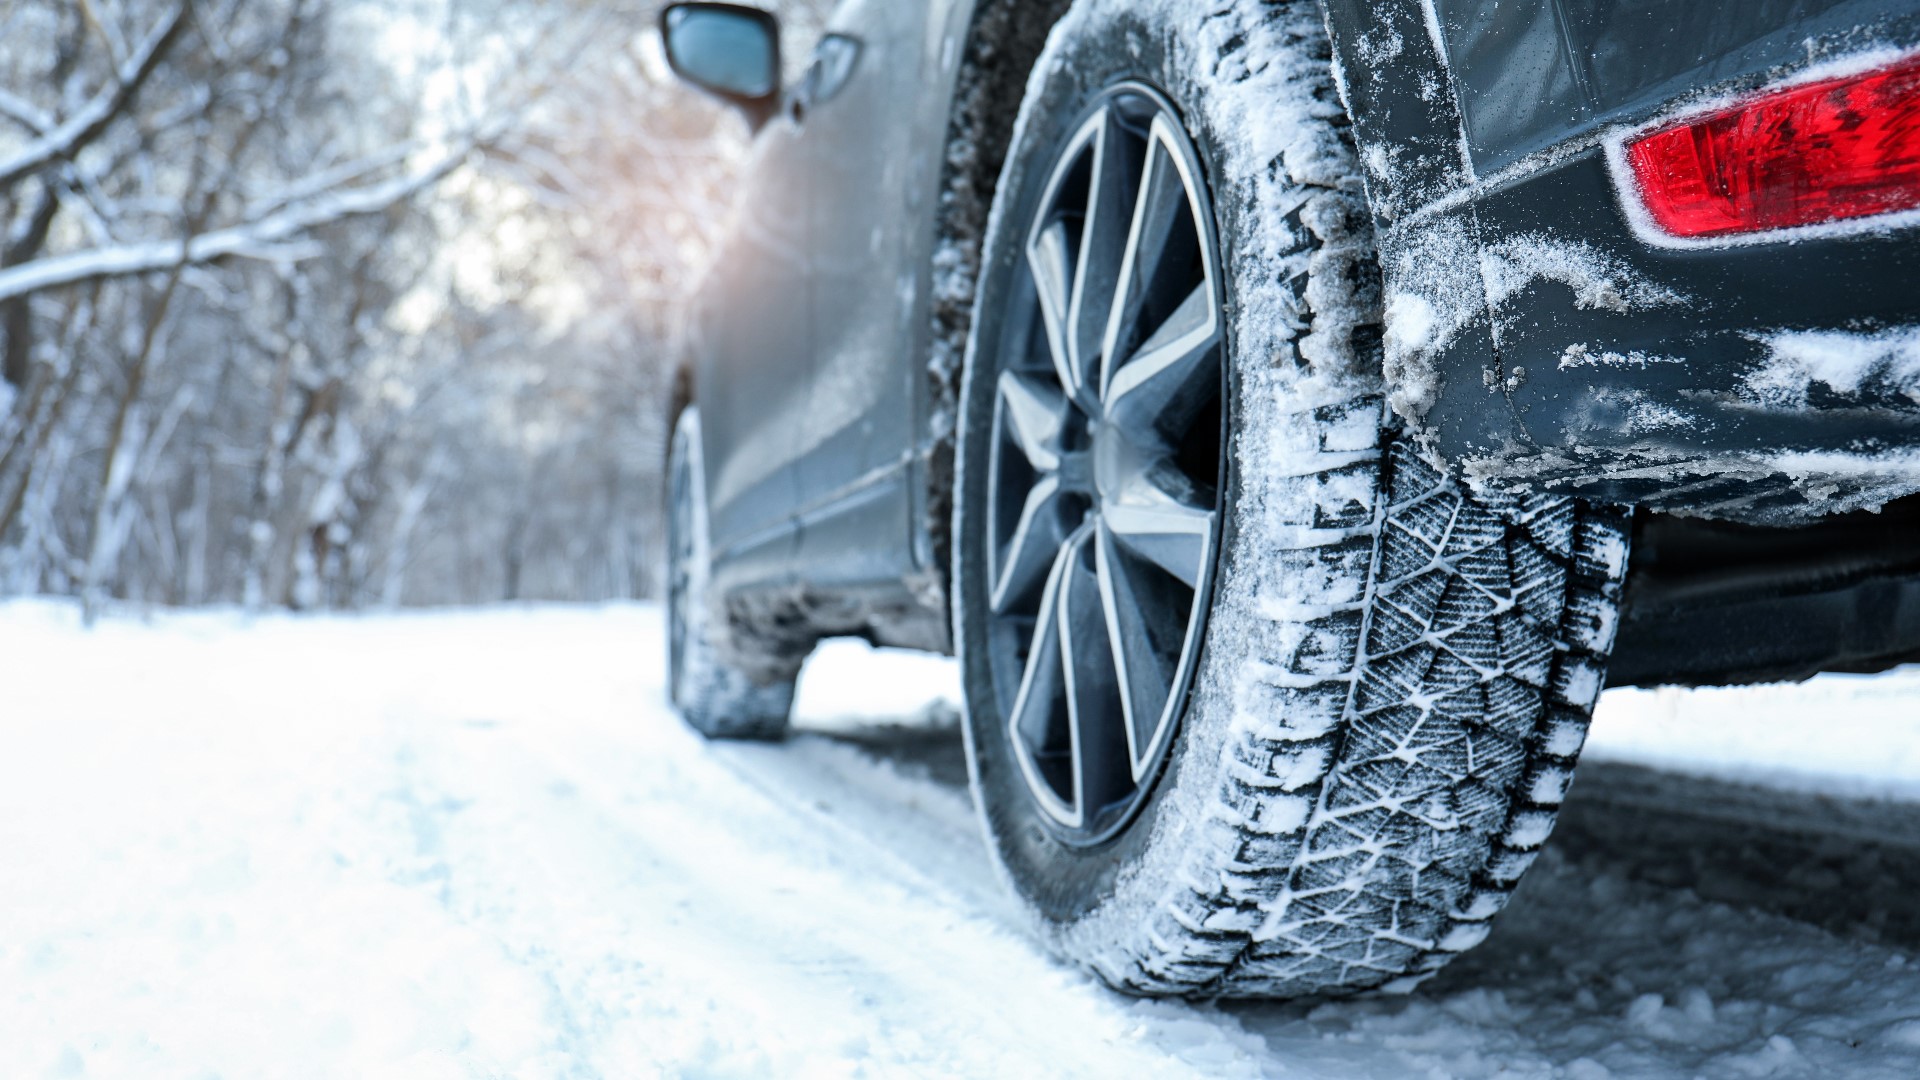 Between colder temperatures and wintry precipitation, your car has to work much harder in the winter, which impacts your fuel economy.